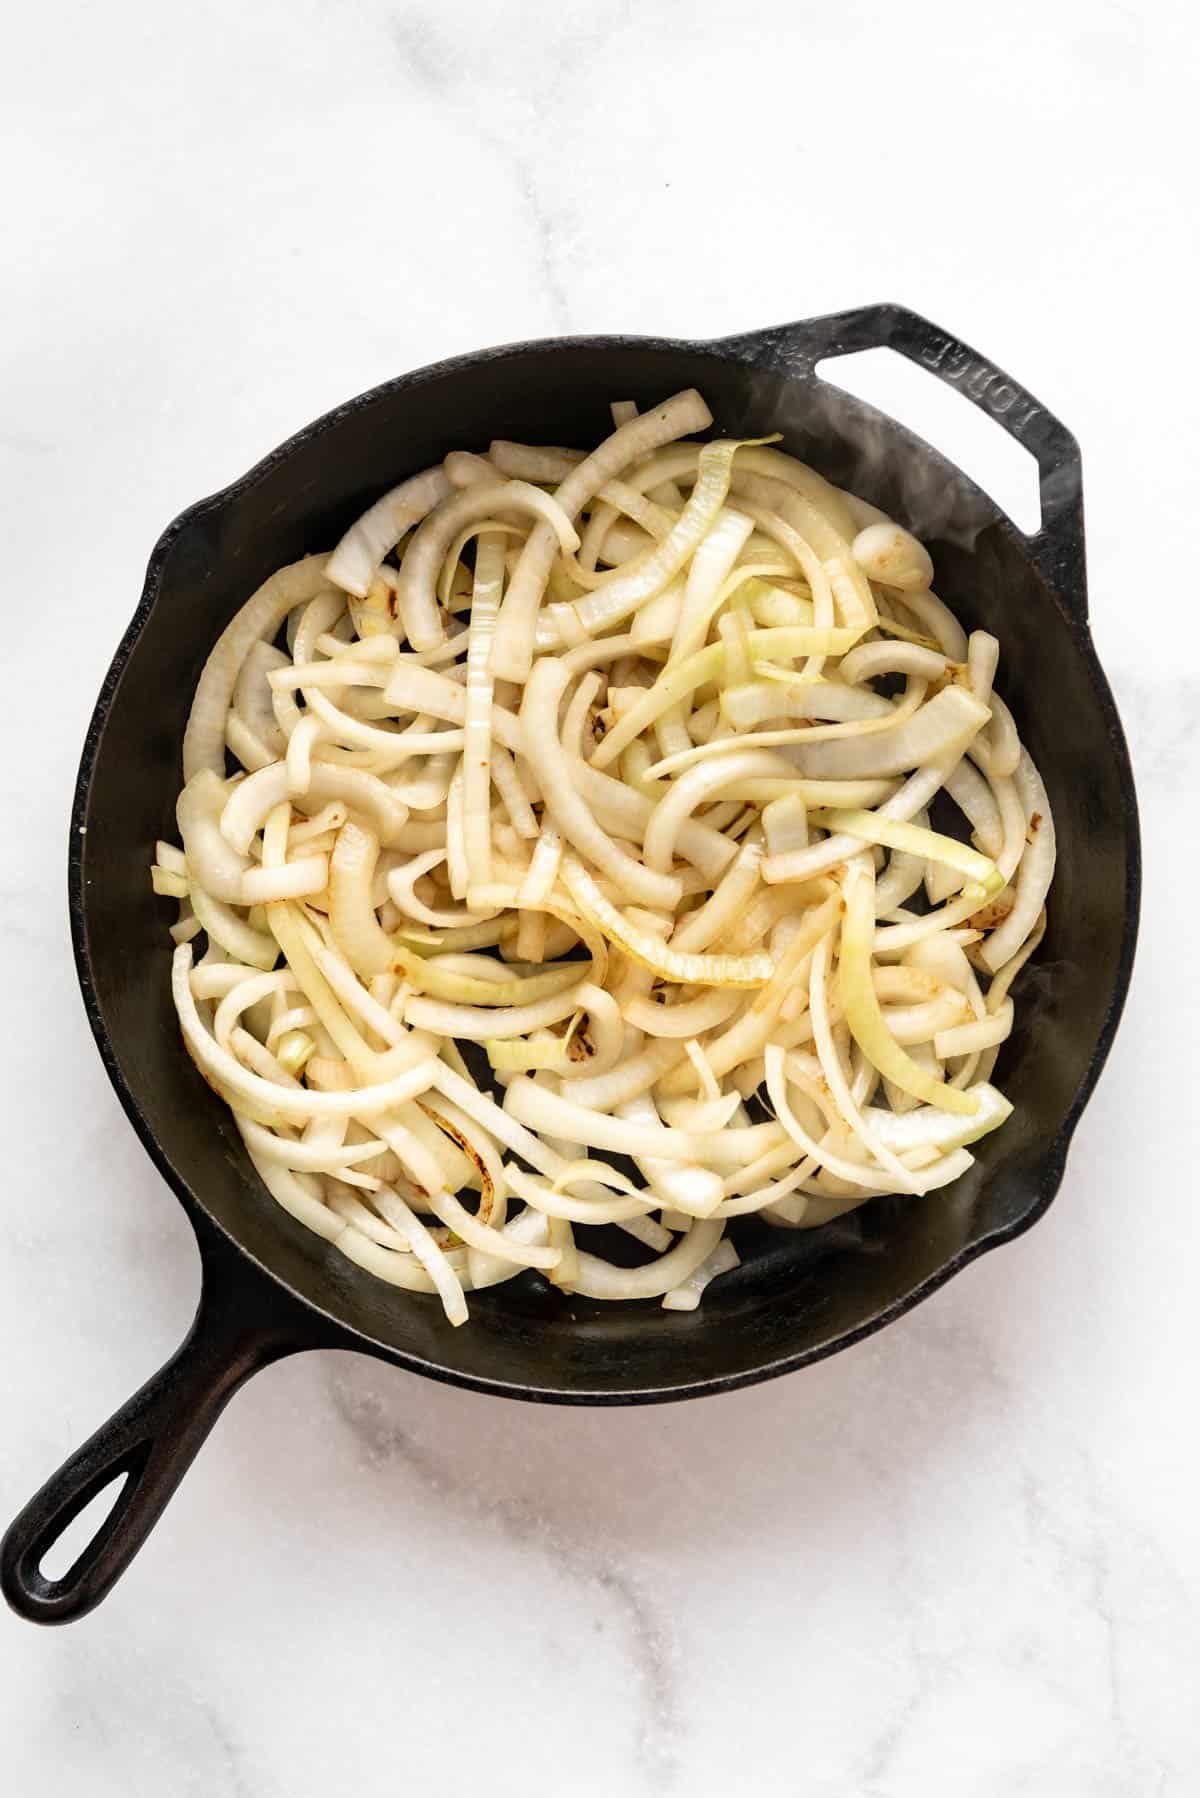 Sliced onions in a cast iron skillet.